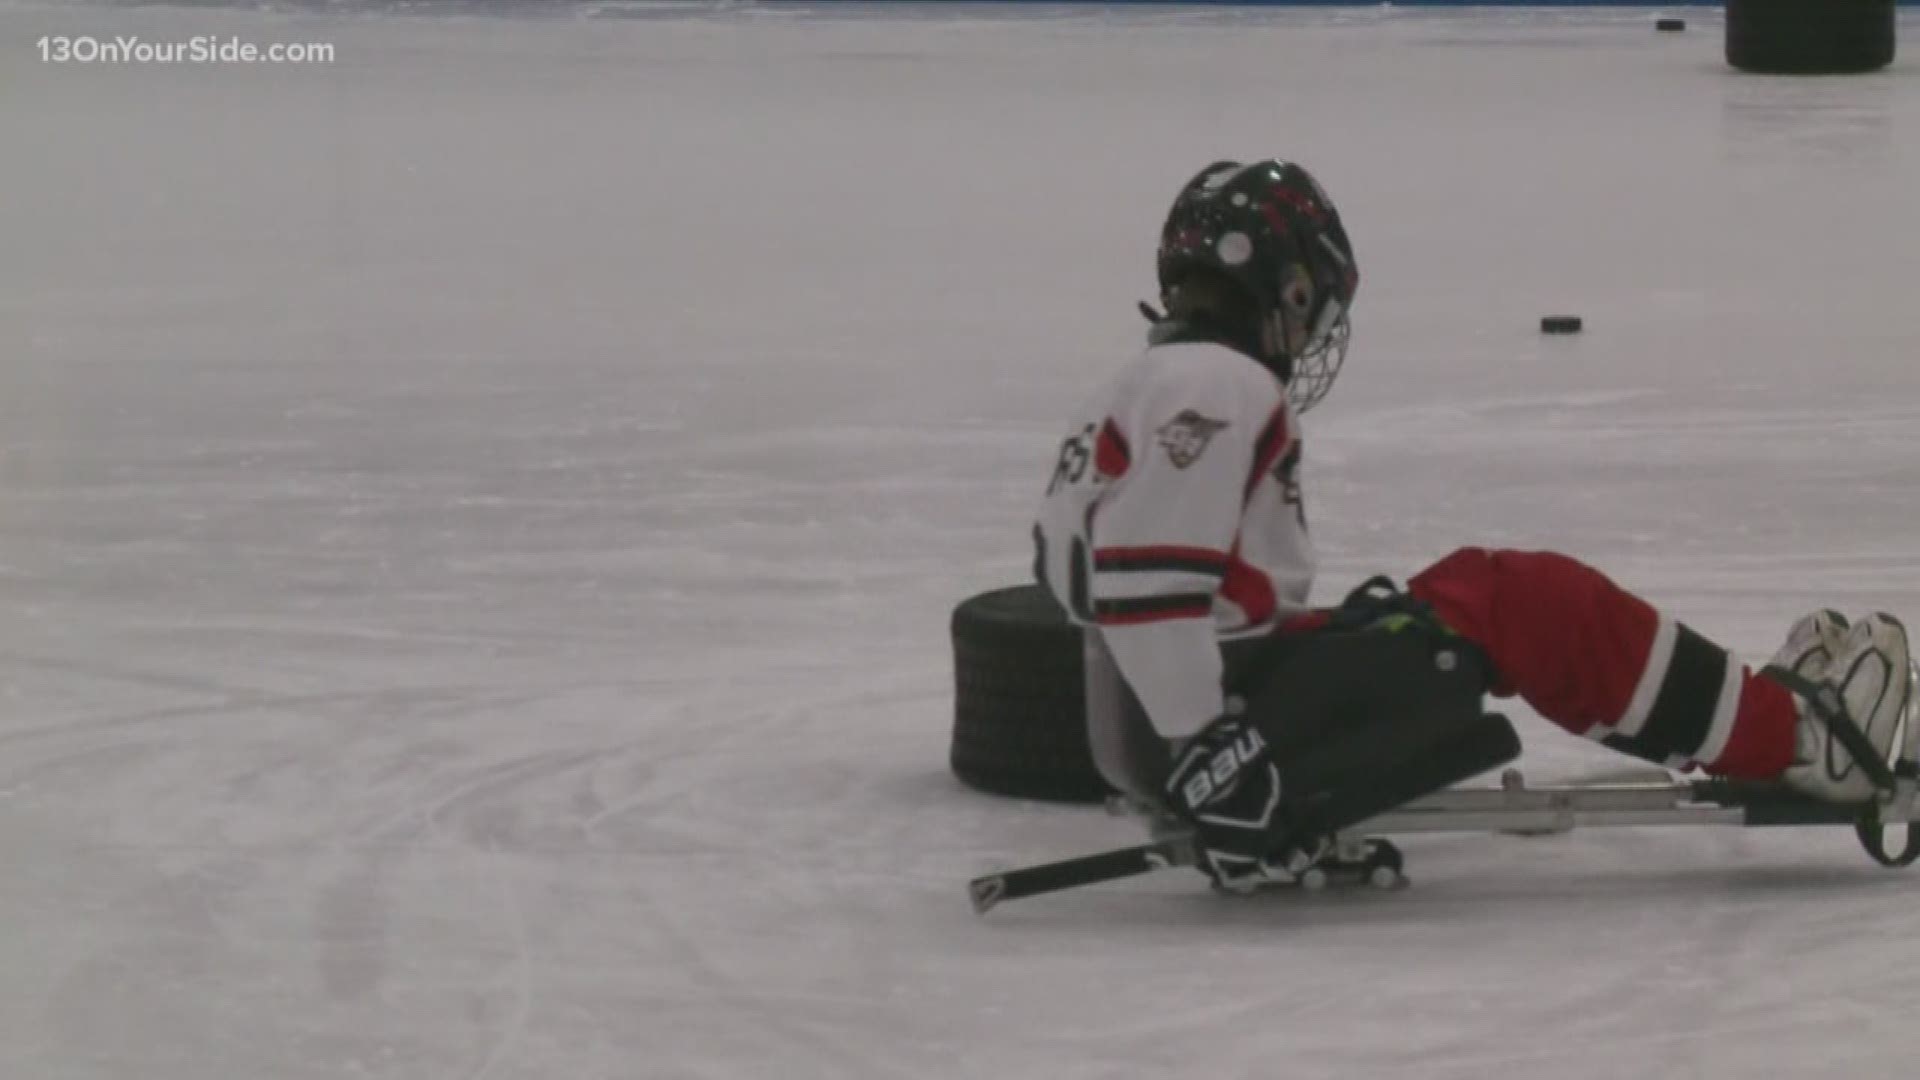 This weekend, 45 of the best youth sled hockey teams are in Grand Rapids for the International Youth Sled Hockey Invitational.